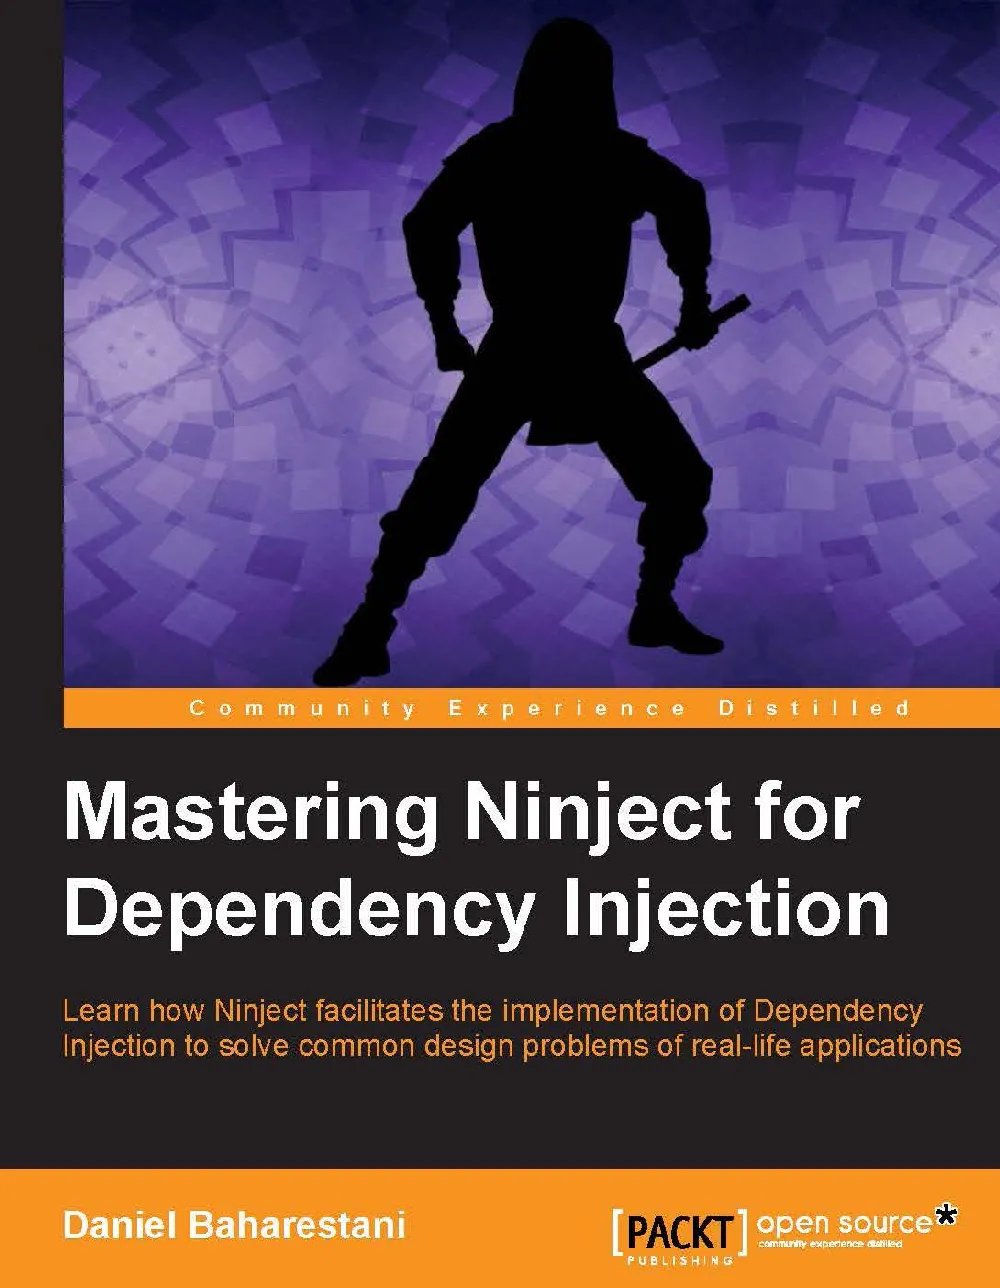 Mastering Ninject for Dependency Injection